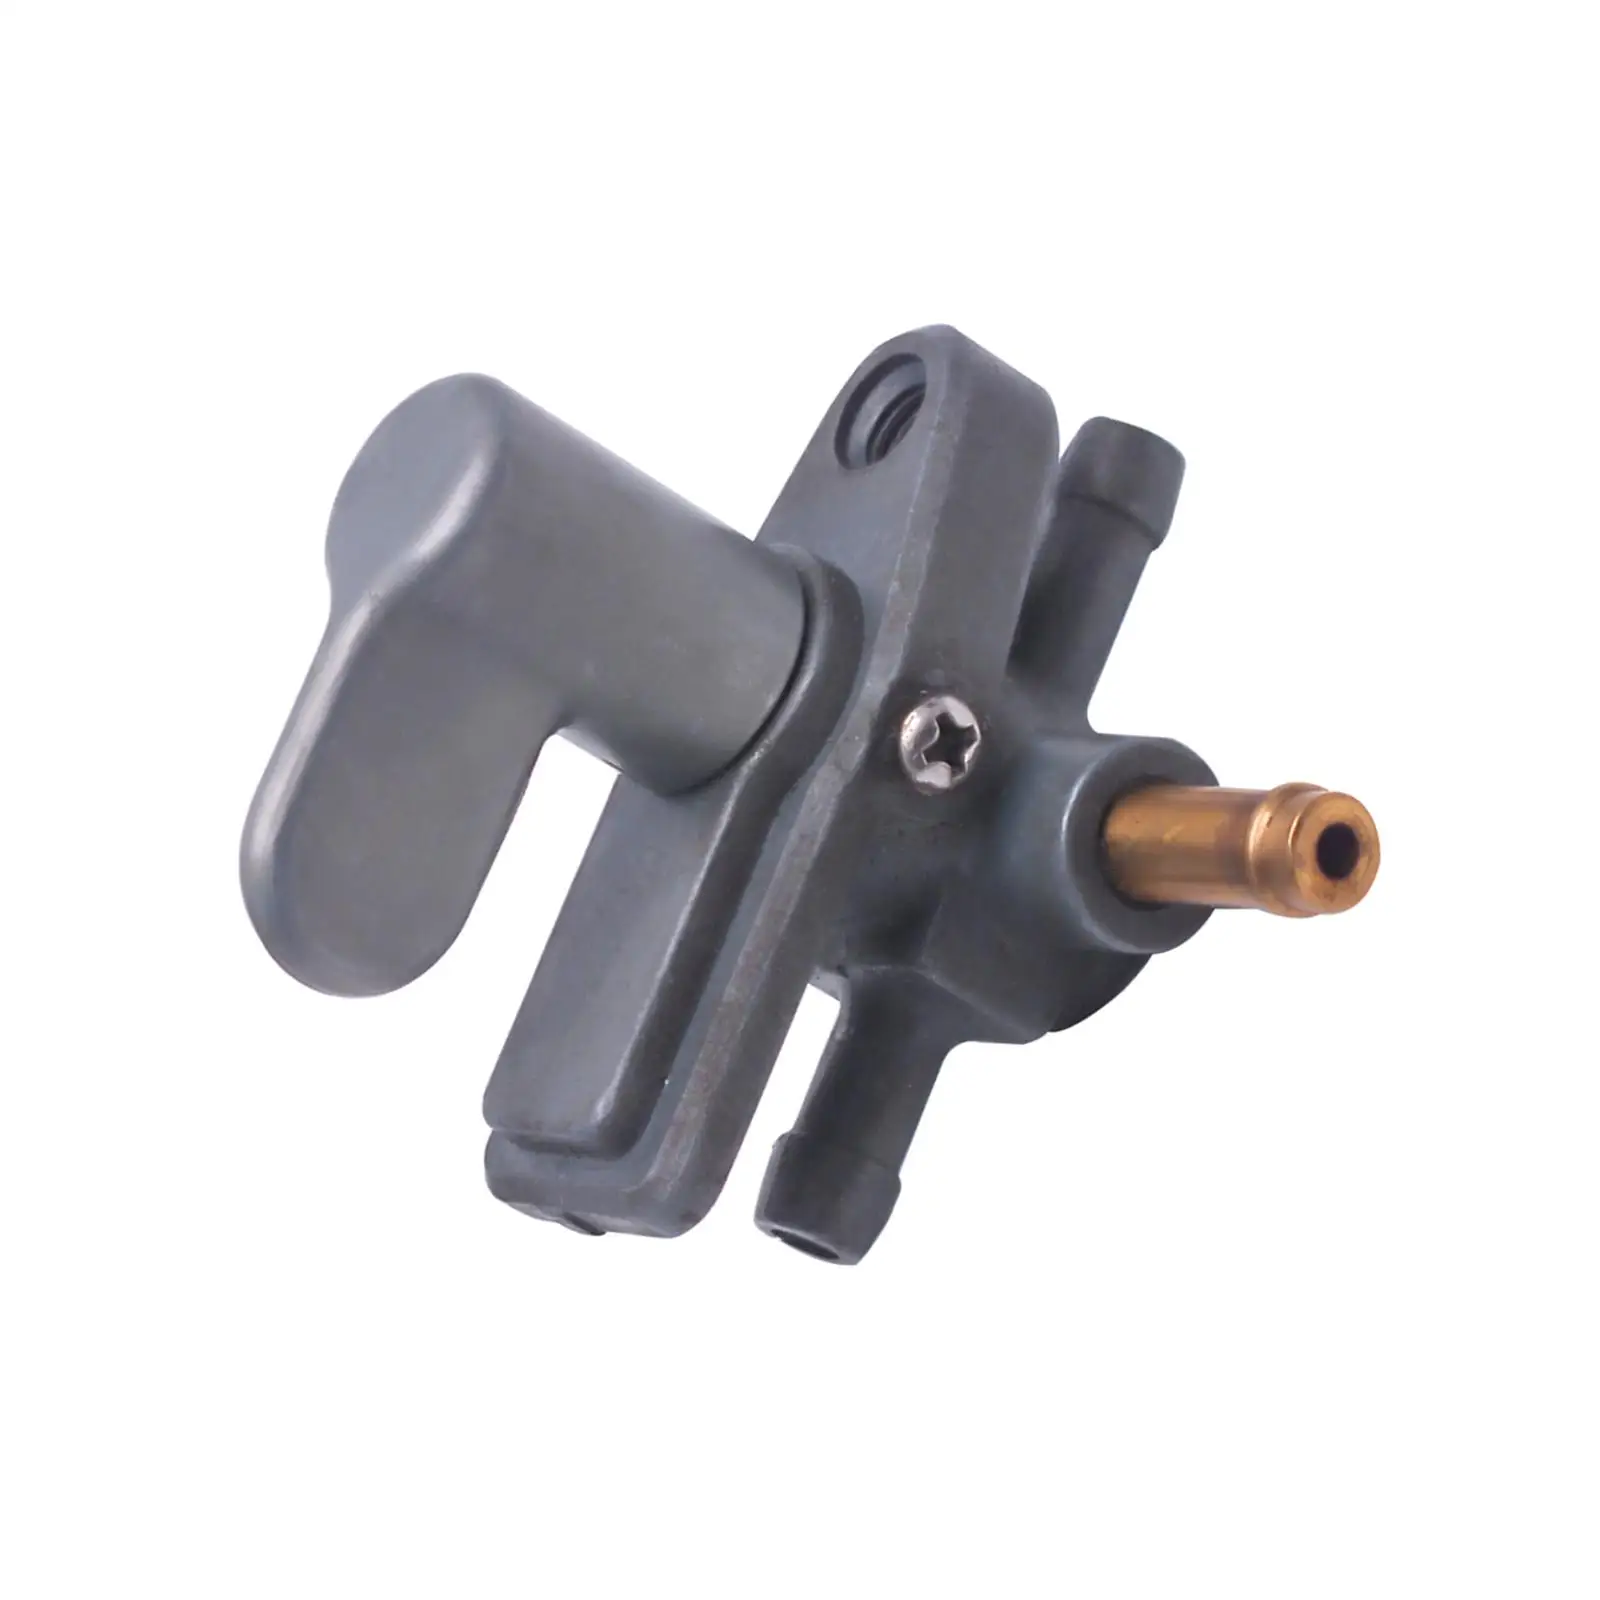 Fuel Cock Assy Switch Repair Parts for Yamaha Outboard Motor 4T 4HP 5HP 6HP Stable Performance Convenient Installation